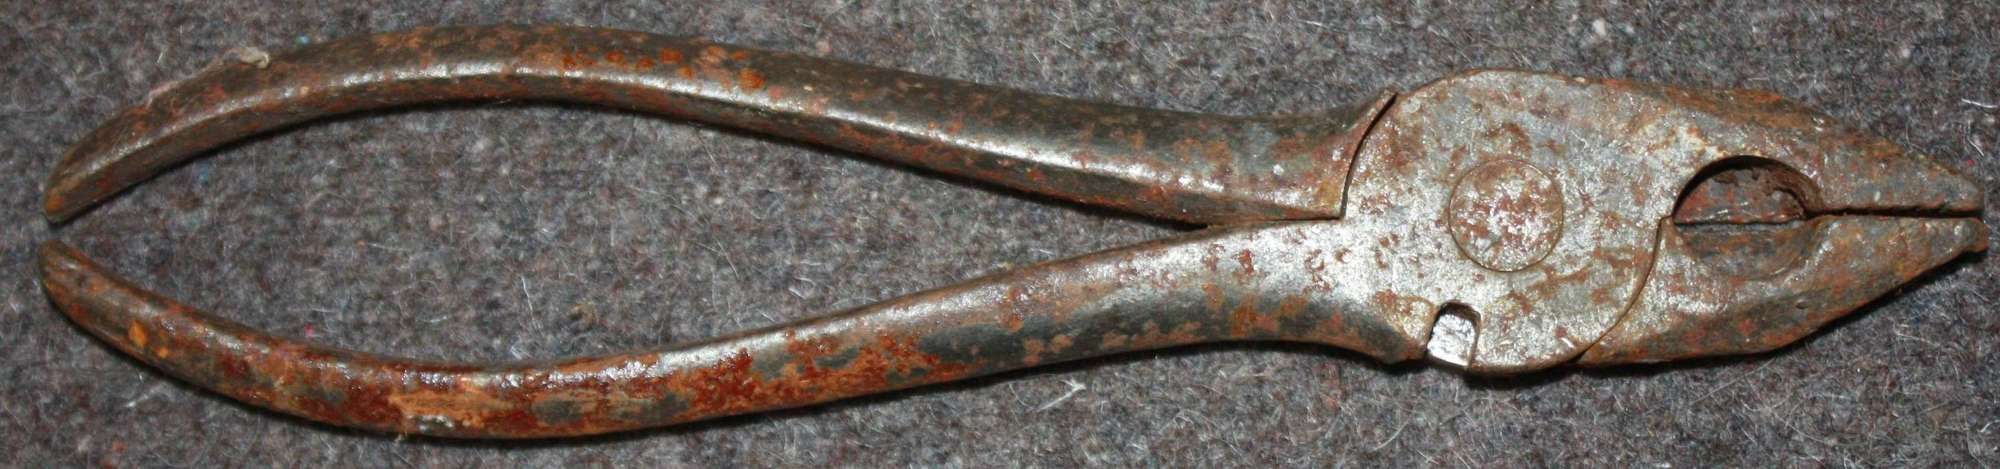 A PAIR OF 1915 DATED PLIERS